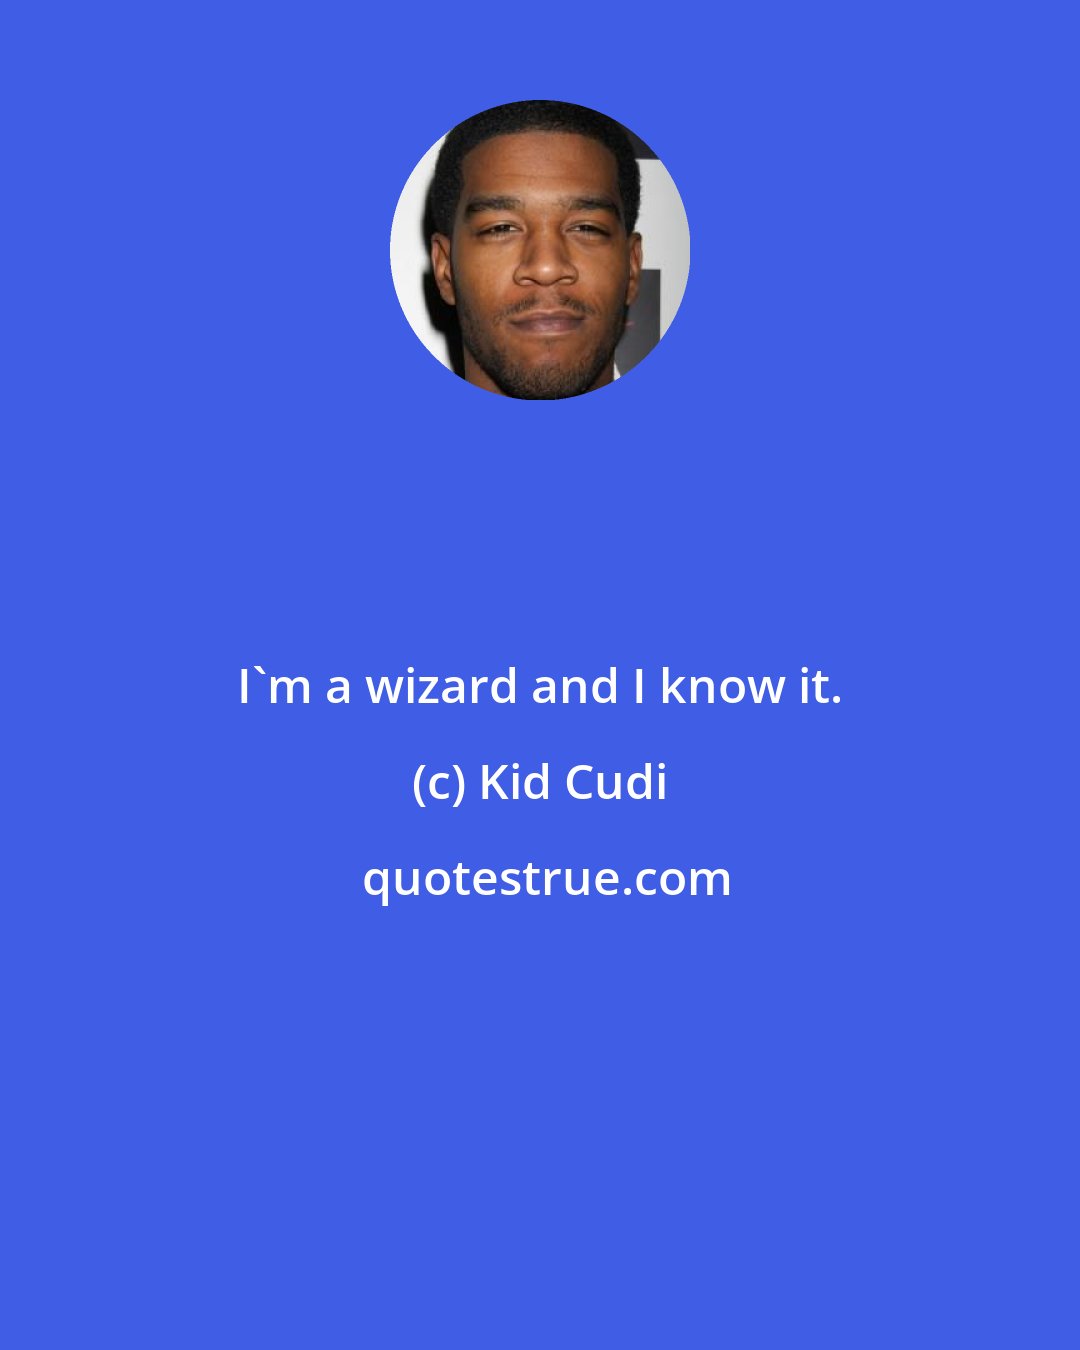 Kid Cudi: I'm a wizard and I know it.